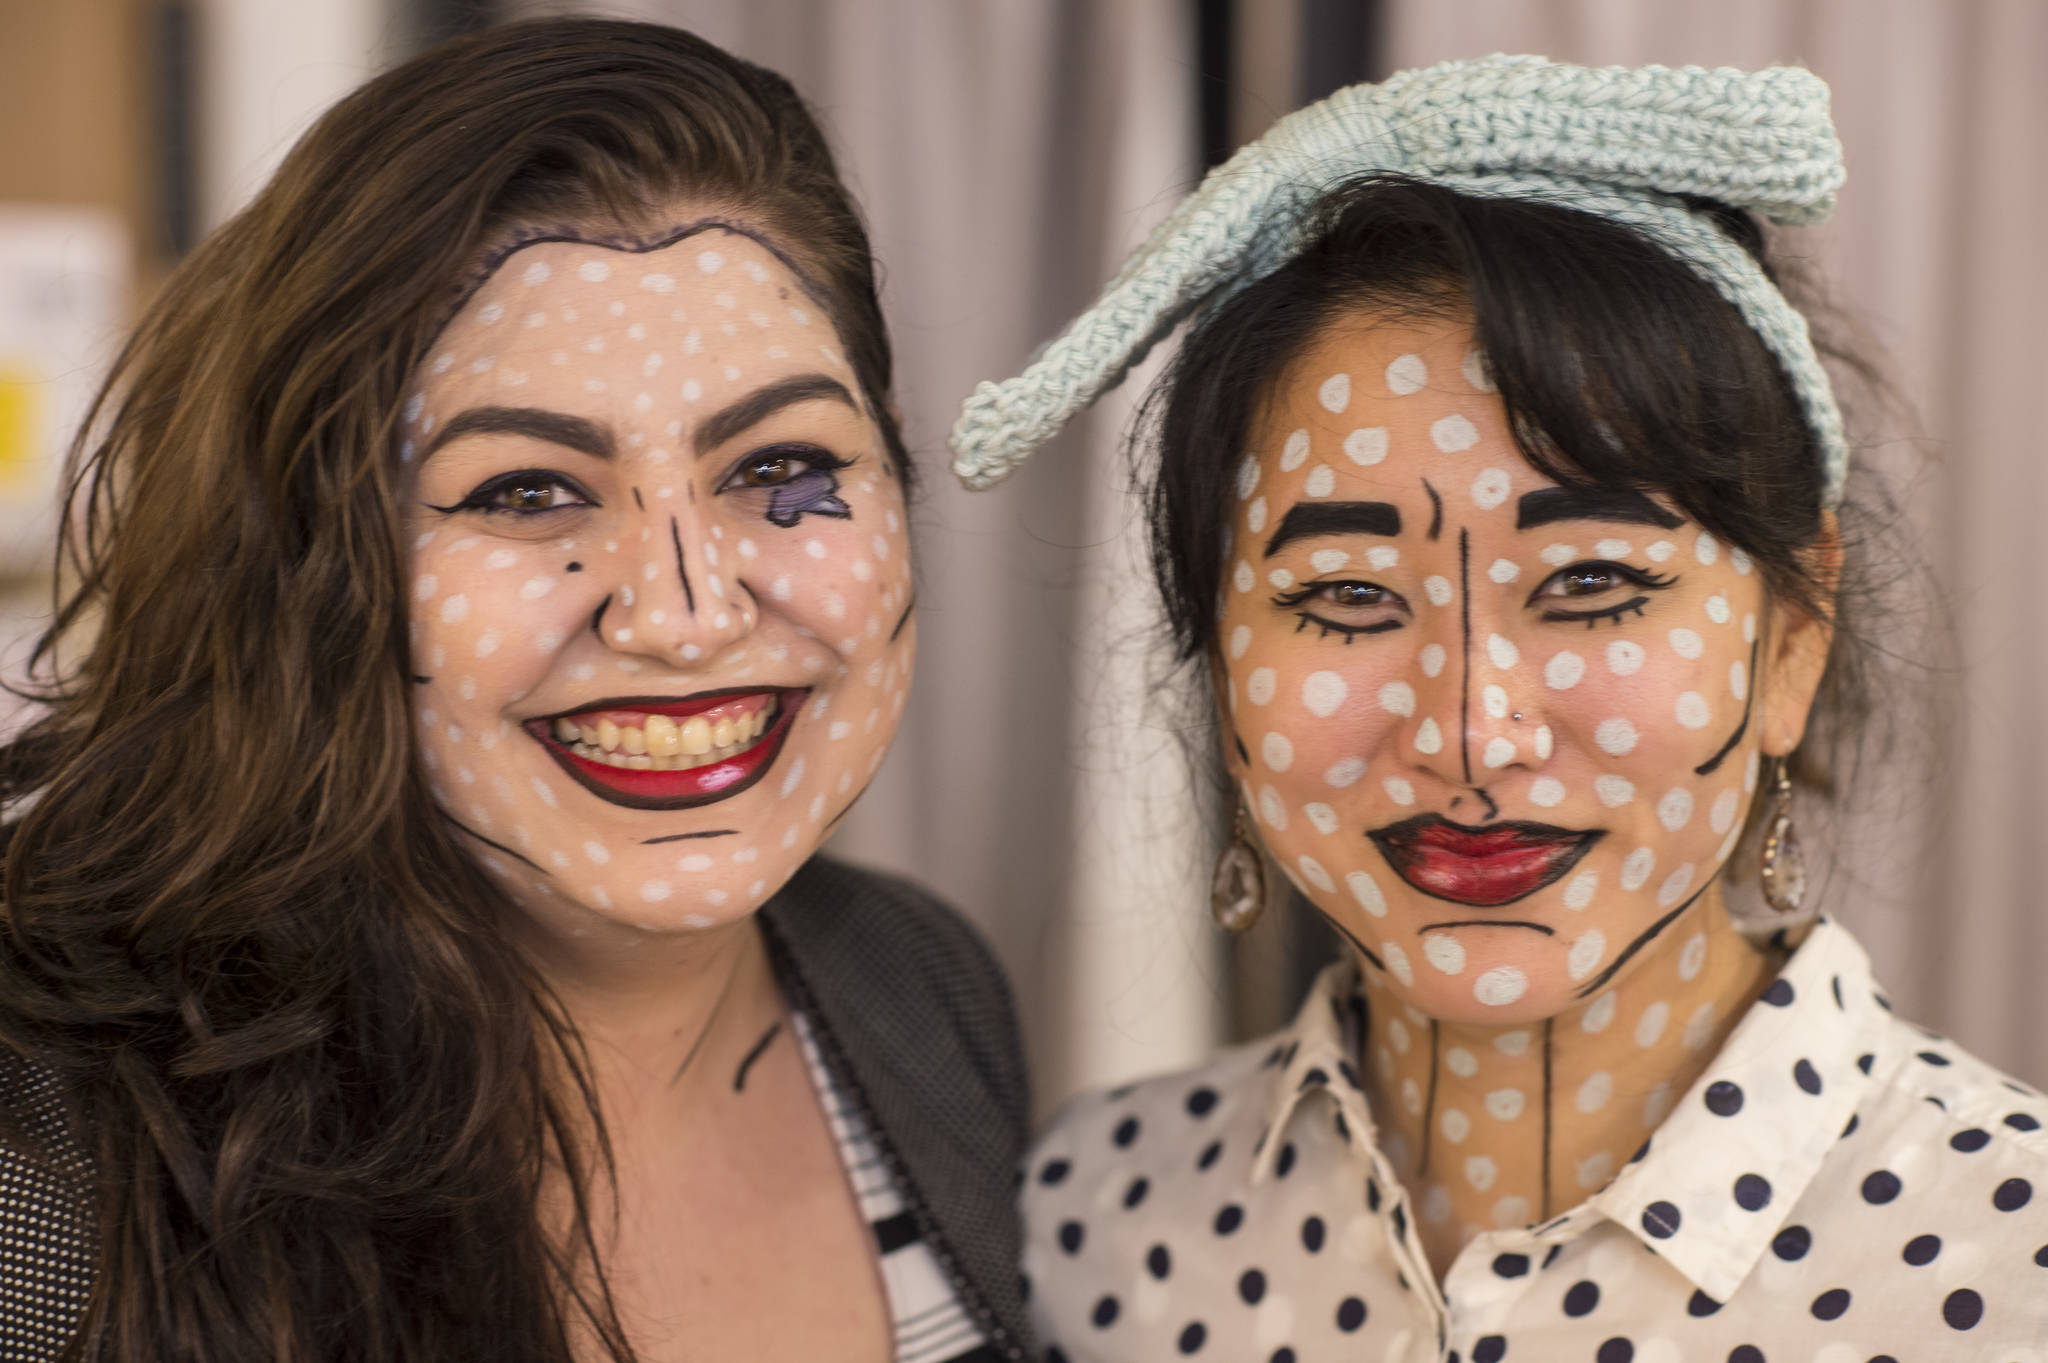 Kindred Post’s Kristen Cornell, left, and Rebecca Hsieh pose for a portrait on Wednesday, Oct. 31, 2018. For the fourth year Kindred Post has organized the Halloween celebration for trick-or-treaters. (Michael Penn | Juneau Empire)